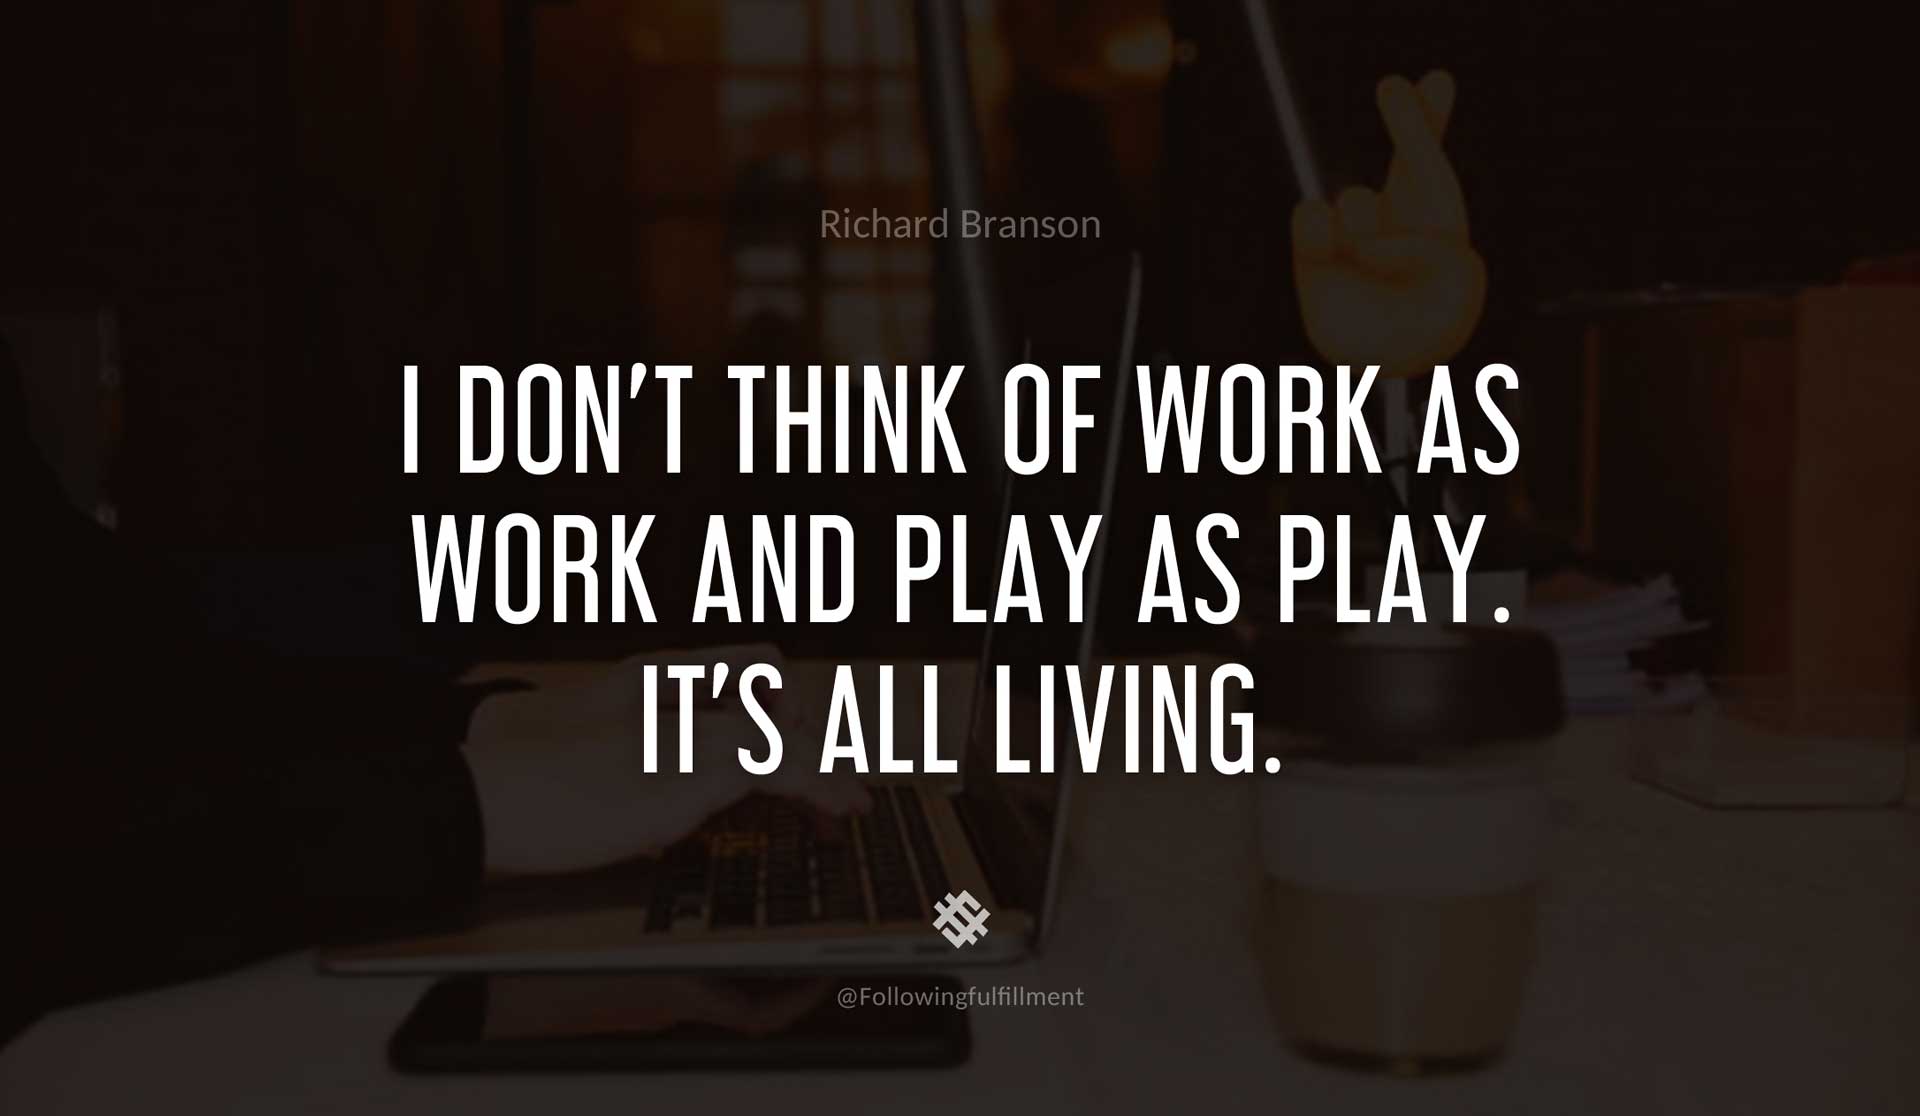 I-don't-think-of-work-as-work-and-play-as-play.-It's-all-living.-RICHARD-BRANSON-Quote.jpg